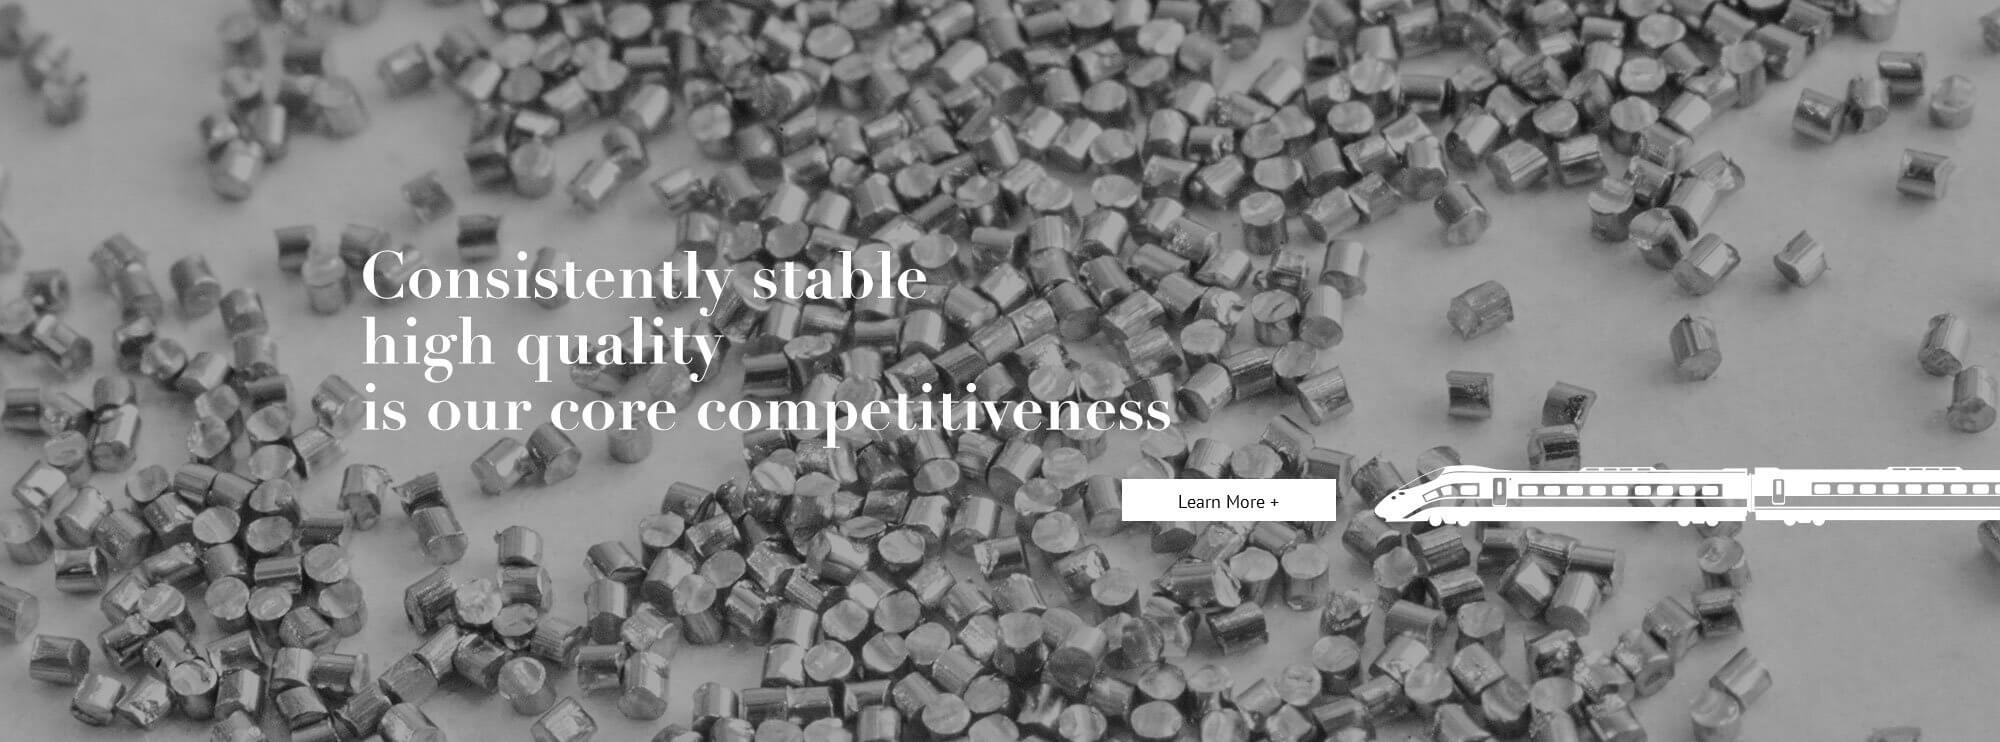 
	Consistently stable high quality is our core competitiveness

